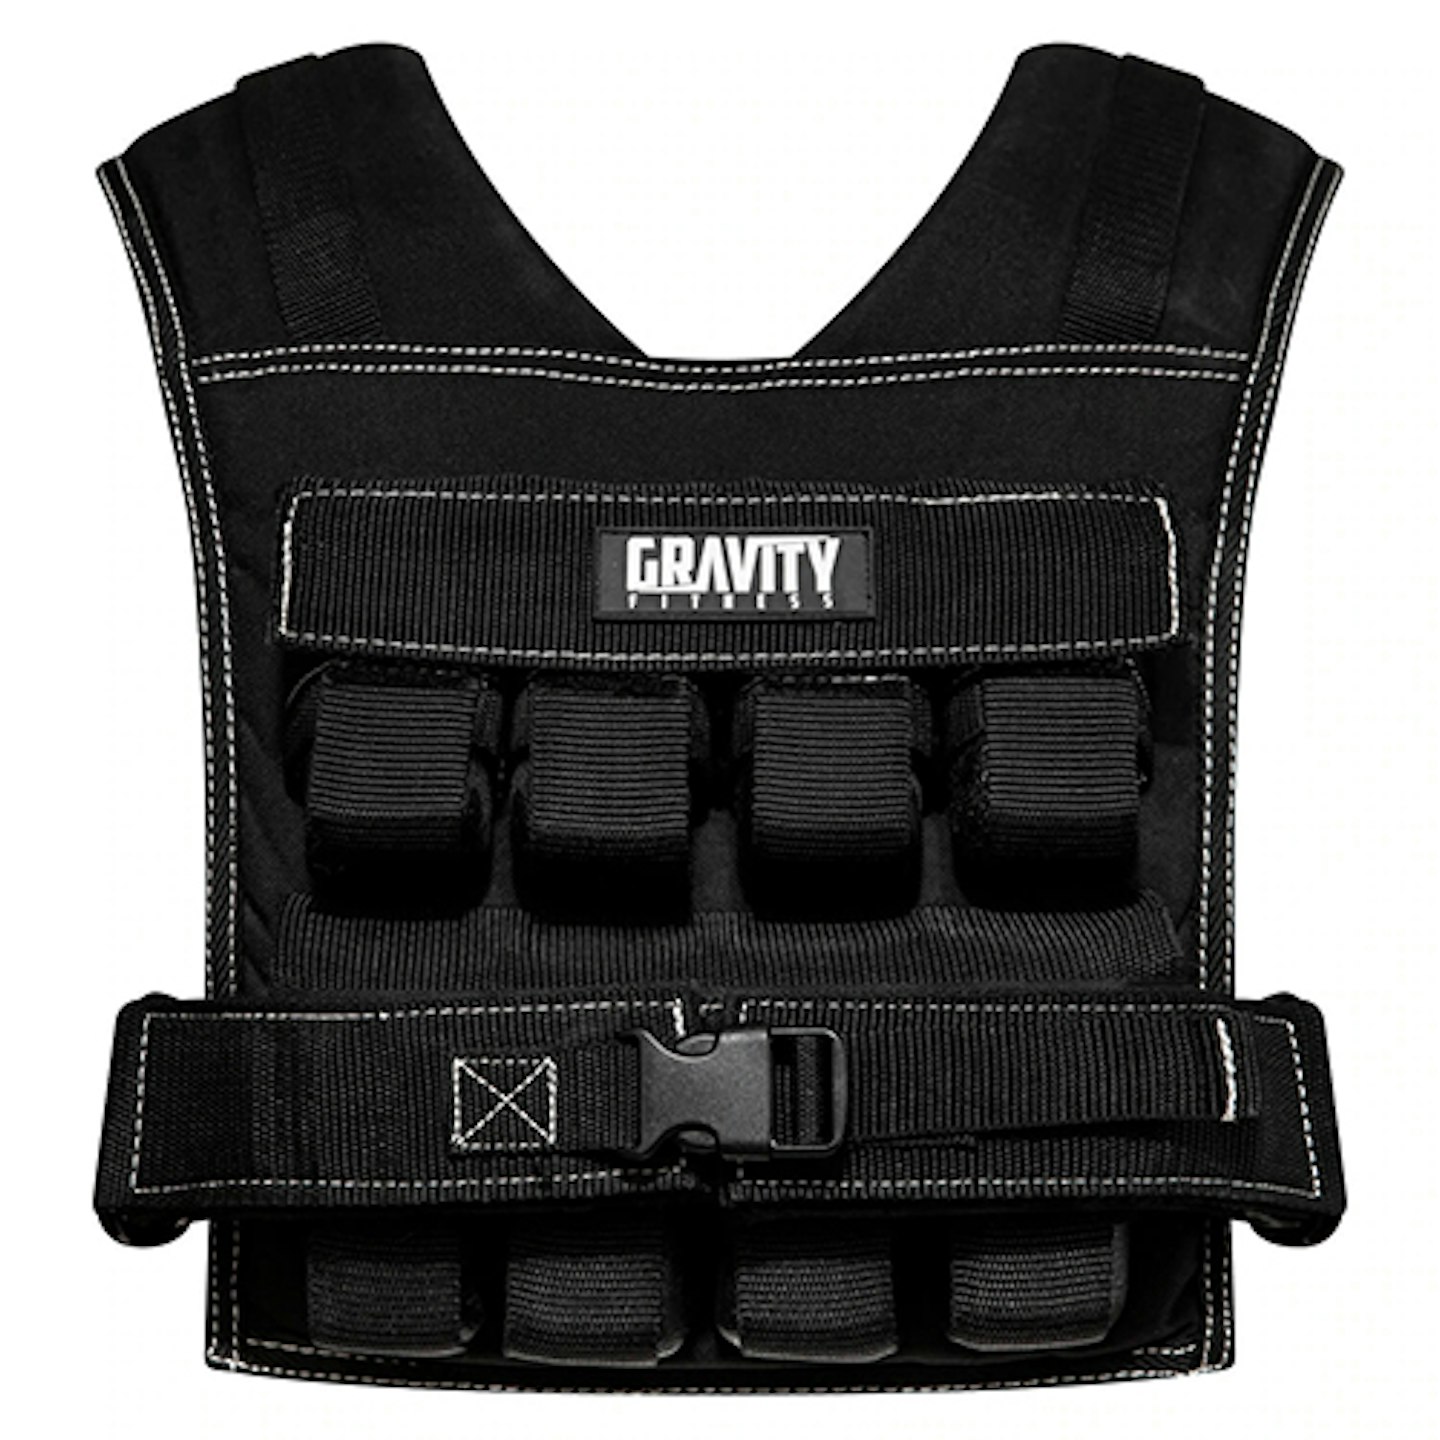 Gravity Fitness Weighted Vest